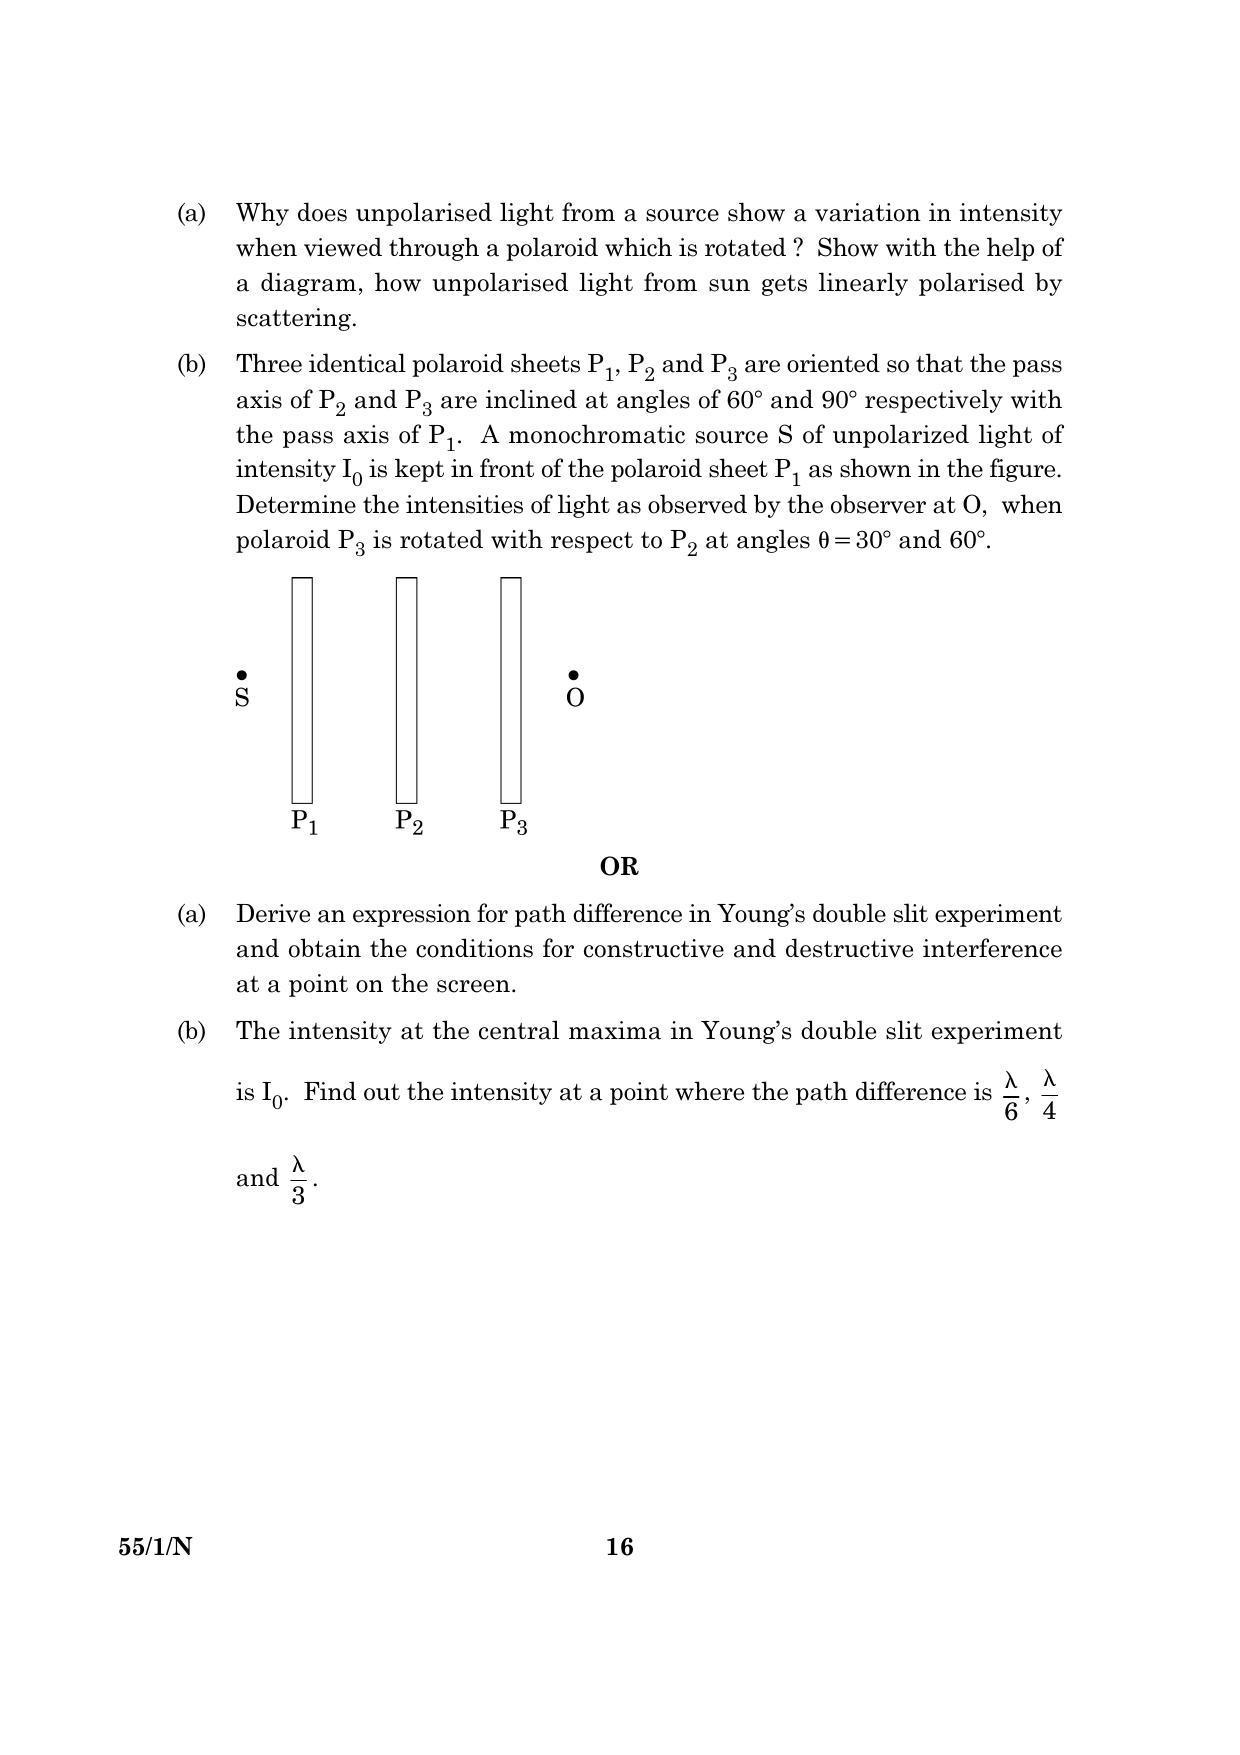 CBSE Class 12 055 Set 1 N Physics Theory 2016 Question Paper - Page 16